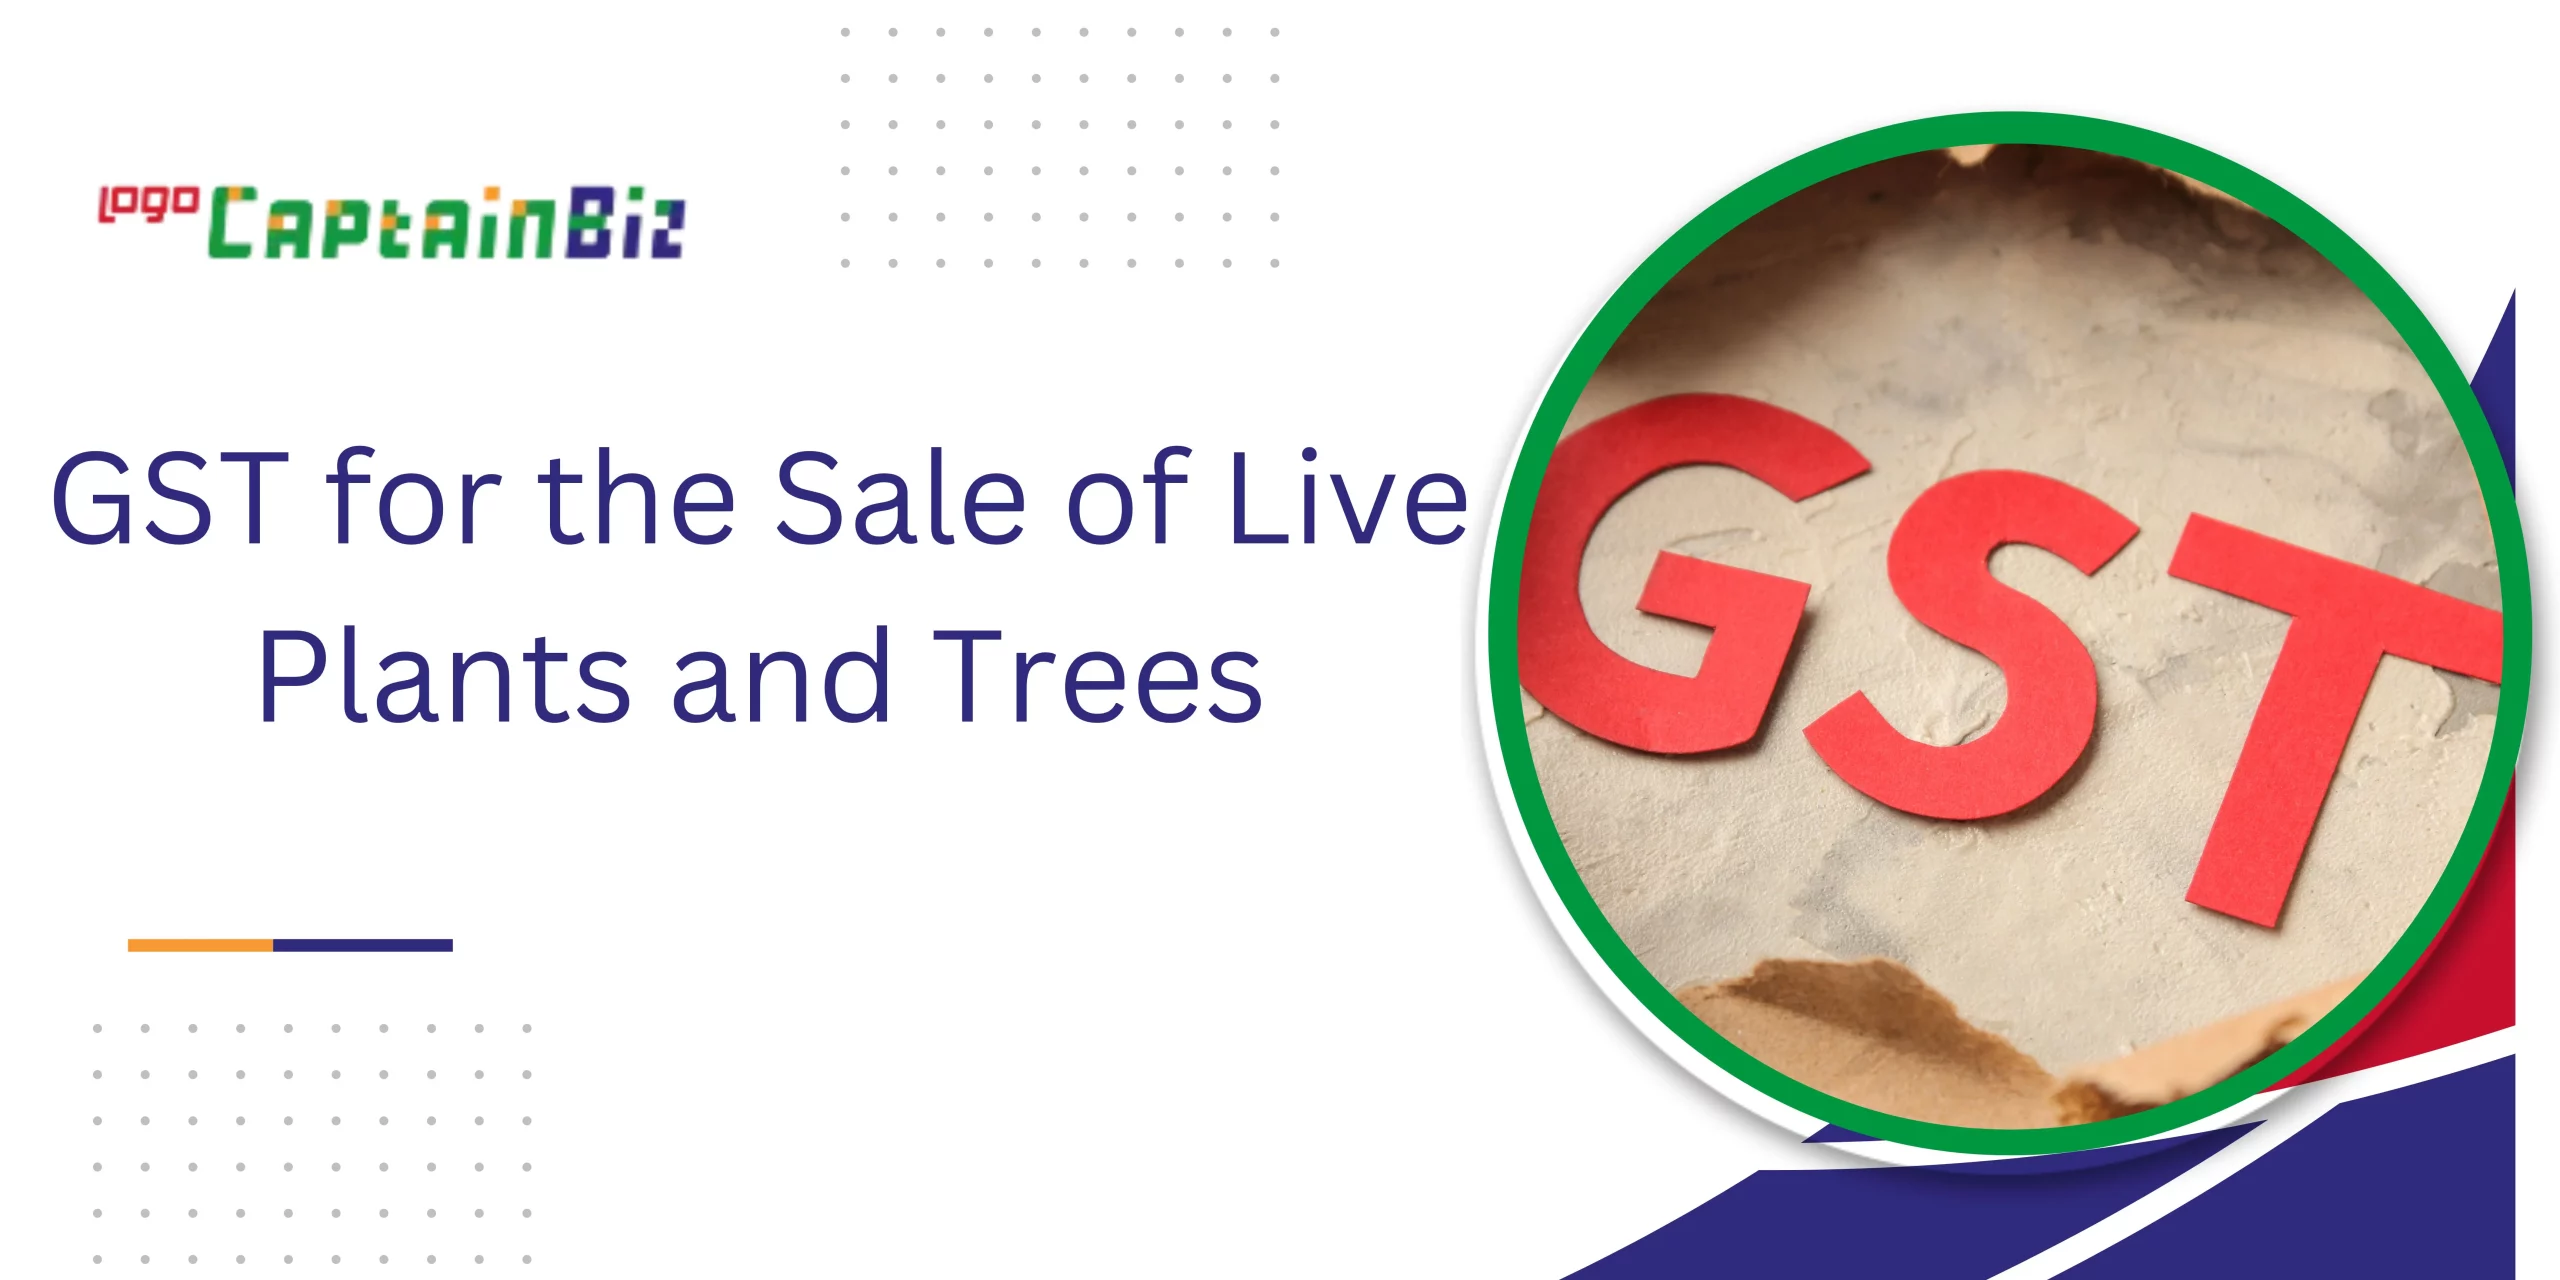 captainbiz gst for the sale of live plants and trees 